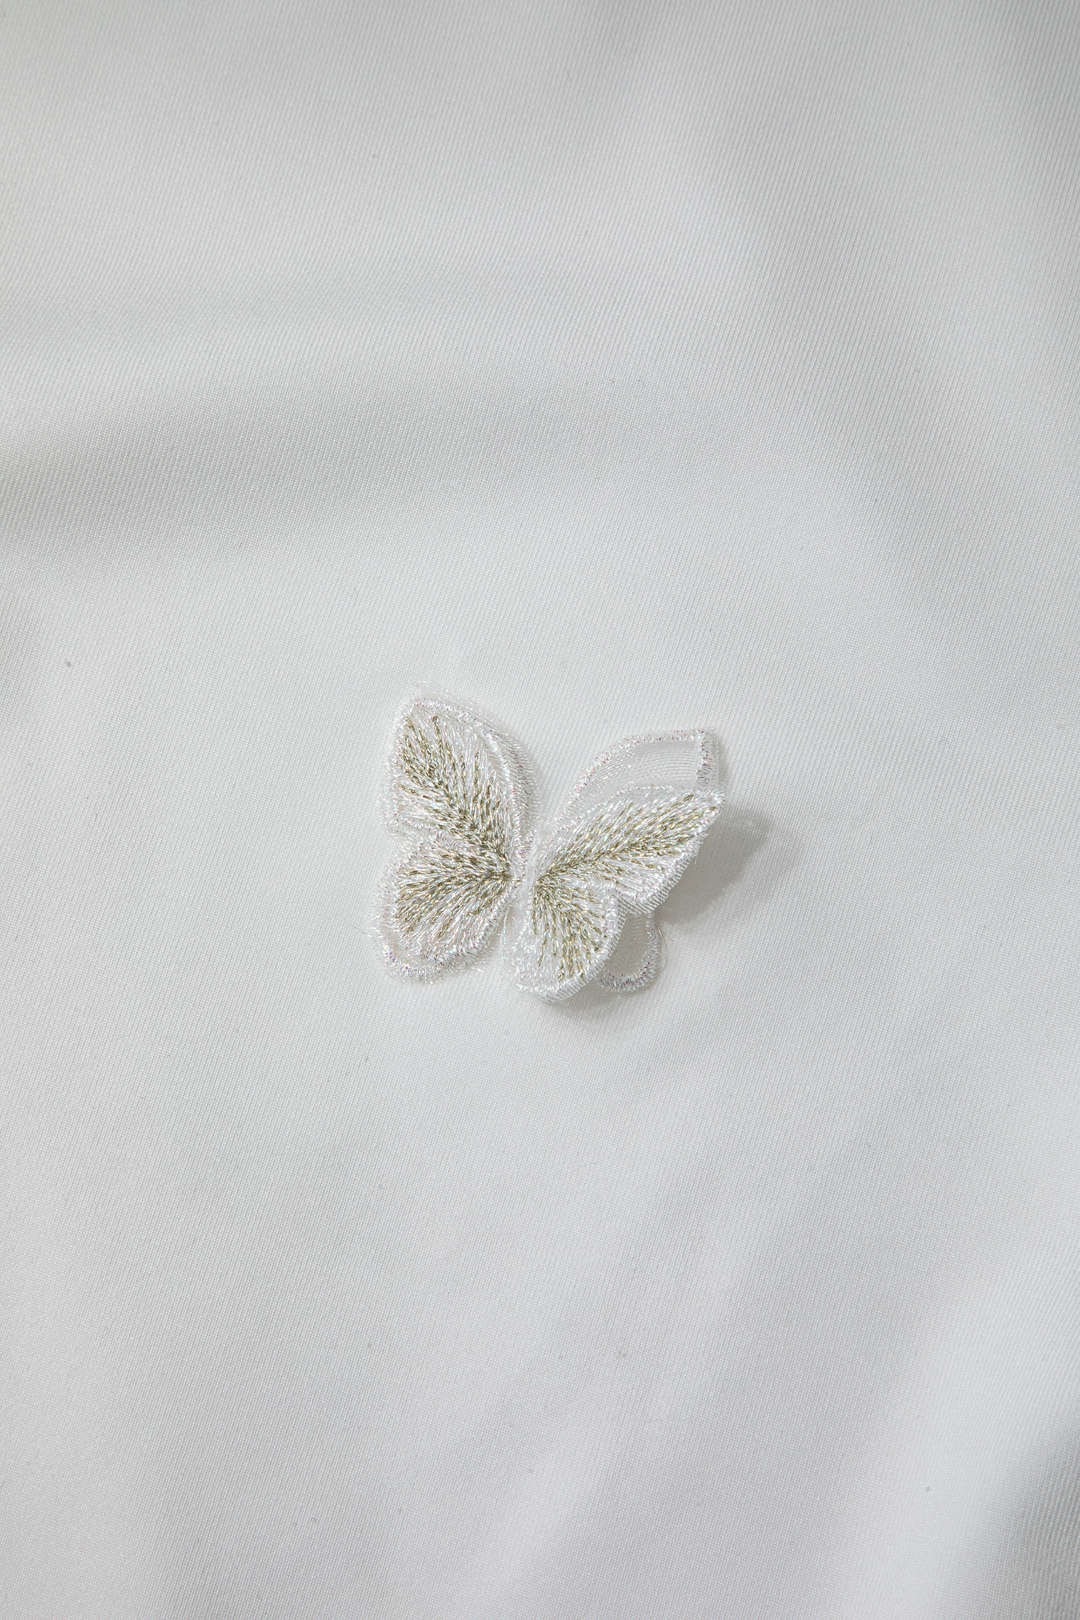 3D Butterfly Embroidery T-shirt